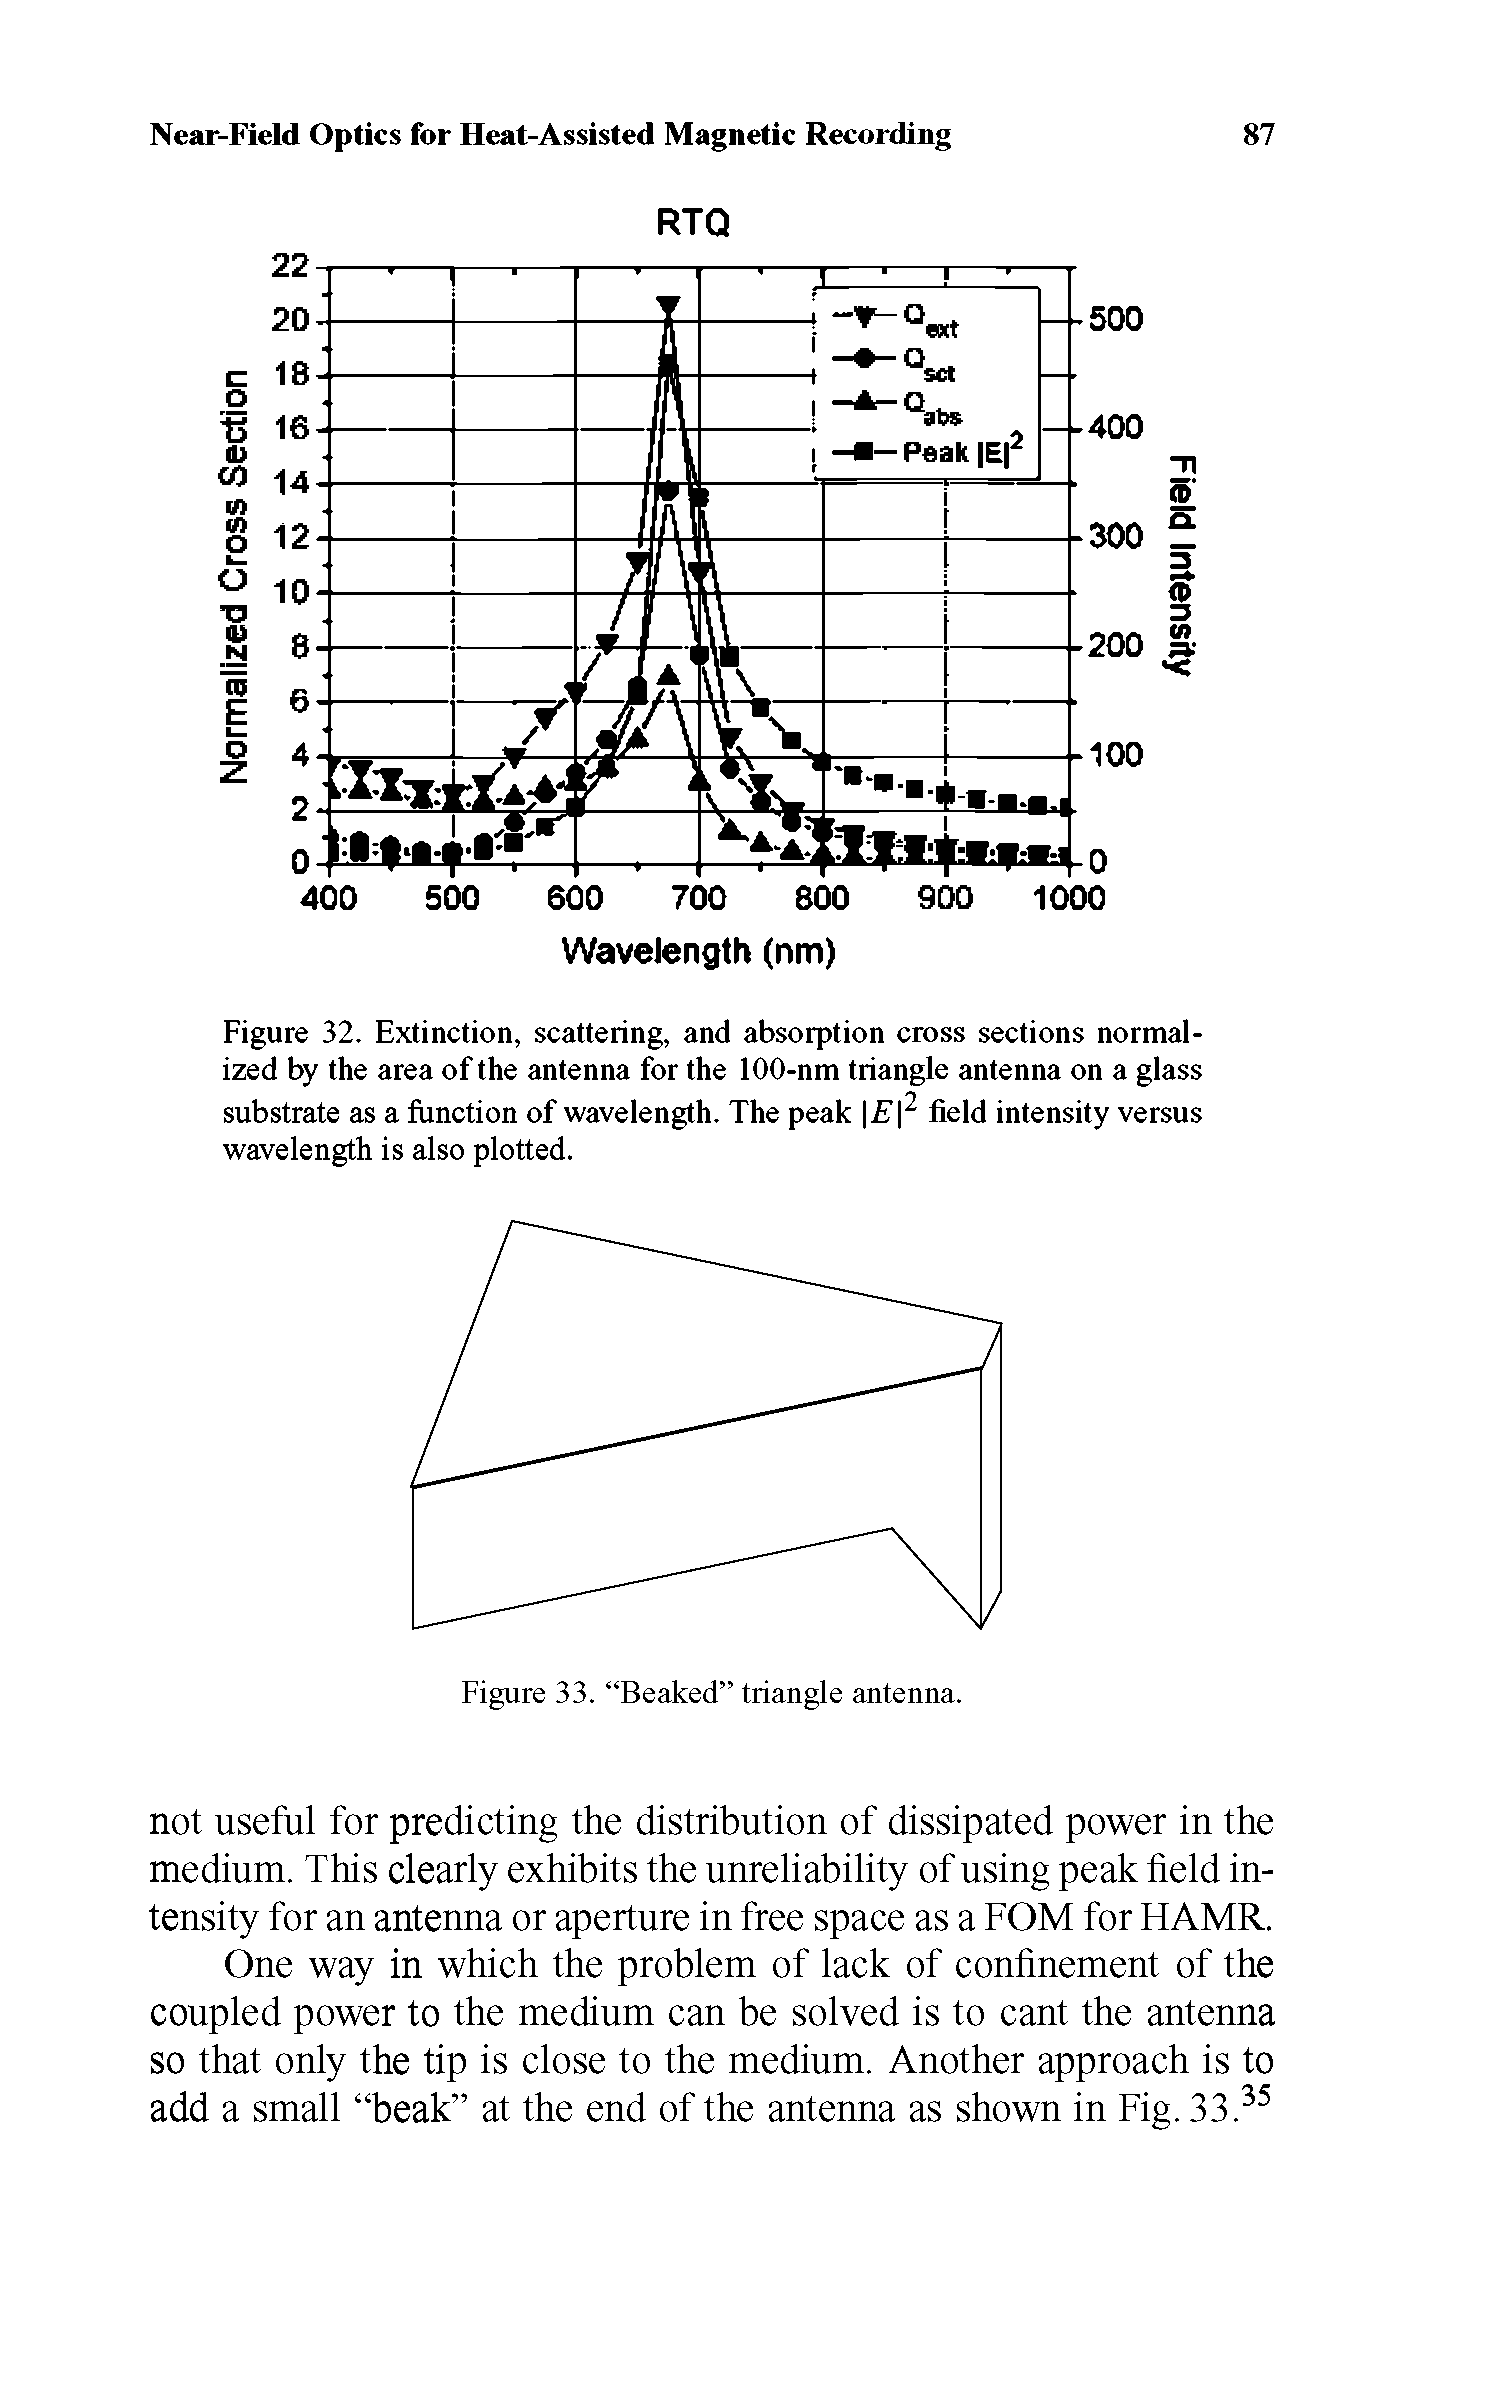 Figure 32. Extinction, scattering, and absorption cross sections normalized by the area of the antenna for the 100-nm triangle antenna on a glass substrate as a function of wavelength. The peak E field intensity versus wavelength is also plotted.